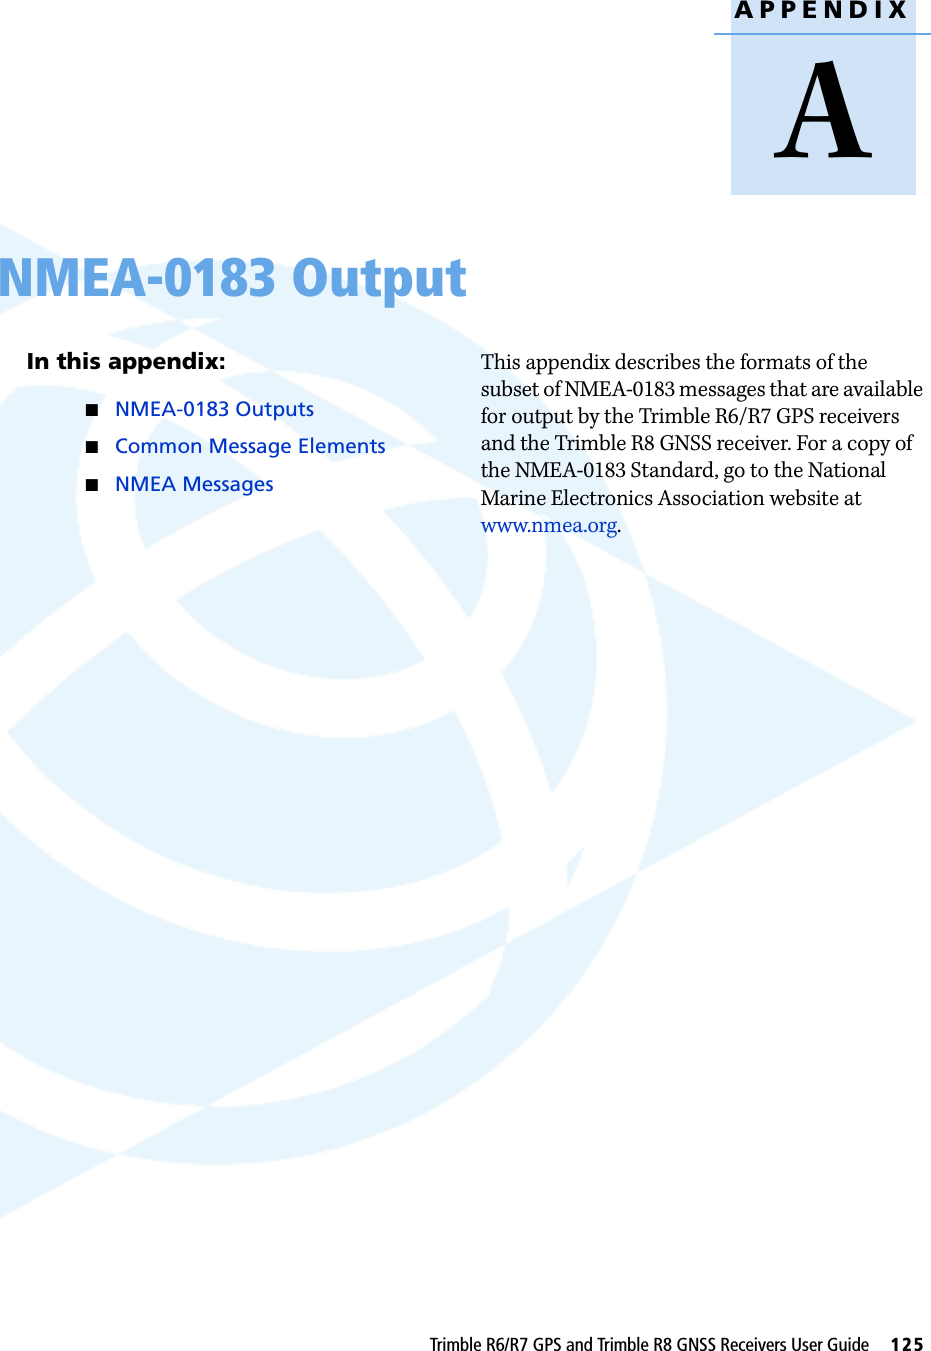 APPENDIXATrimble R6/R7 GPS and Trimble R8 GNSS Receivers User Guide     125NMEA-0183 Output AIn this appendix:QNMEA-0183 OutputsQCommon Message ElementsQNMEA MessagesThis appendix describes the formats of the subset of NMEA-0183 messages that are available for output by the Trimble R6/R7 GPS receivers and the Trimble R8 GNSS receiver. For a copy of the NMEA-0183 Standard, go to the National Marine Electronics Association website at www.nmea.org.